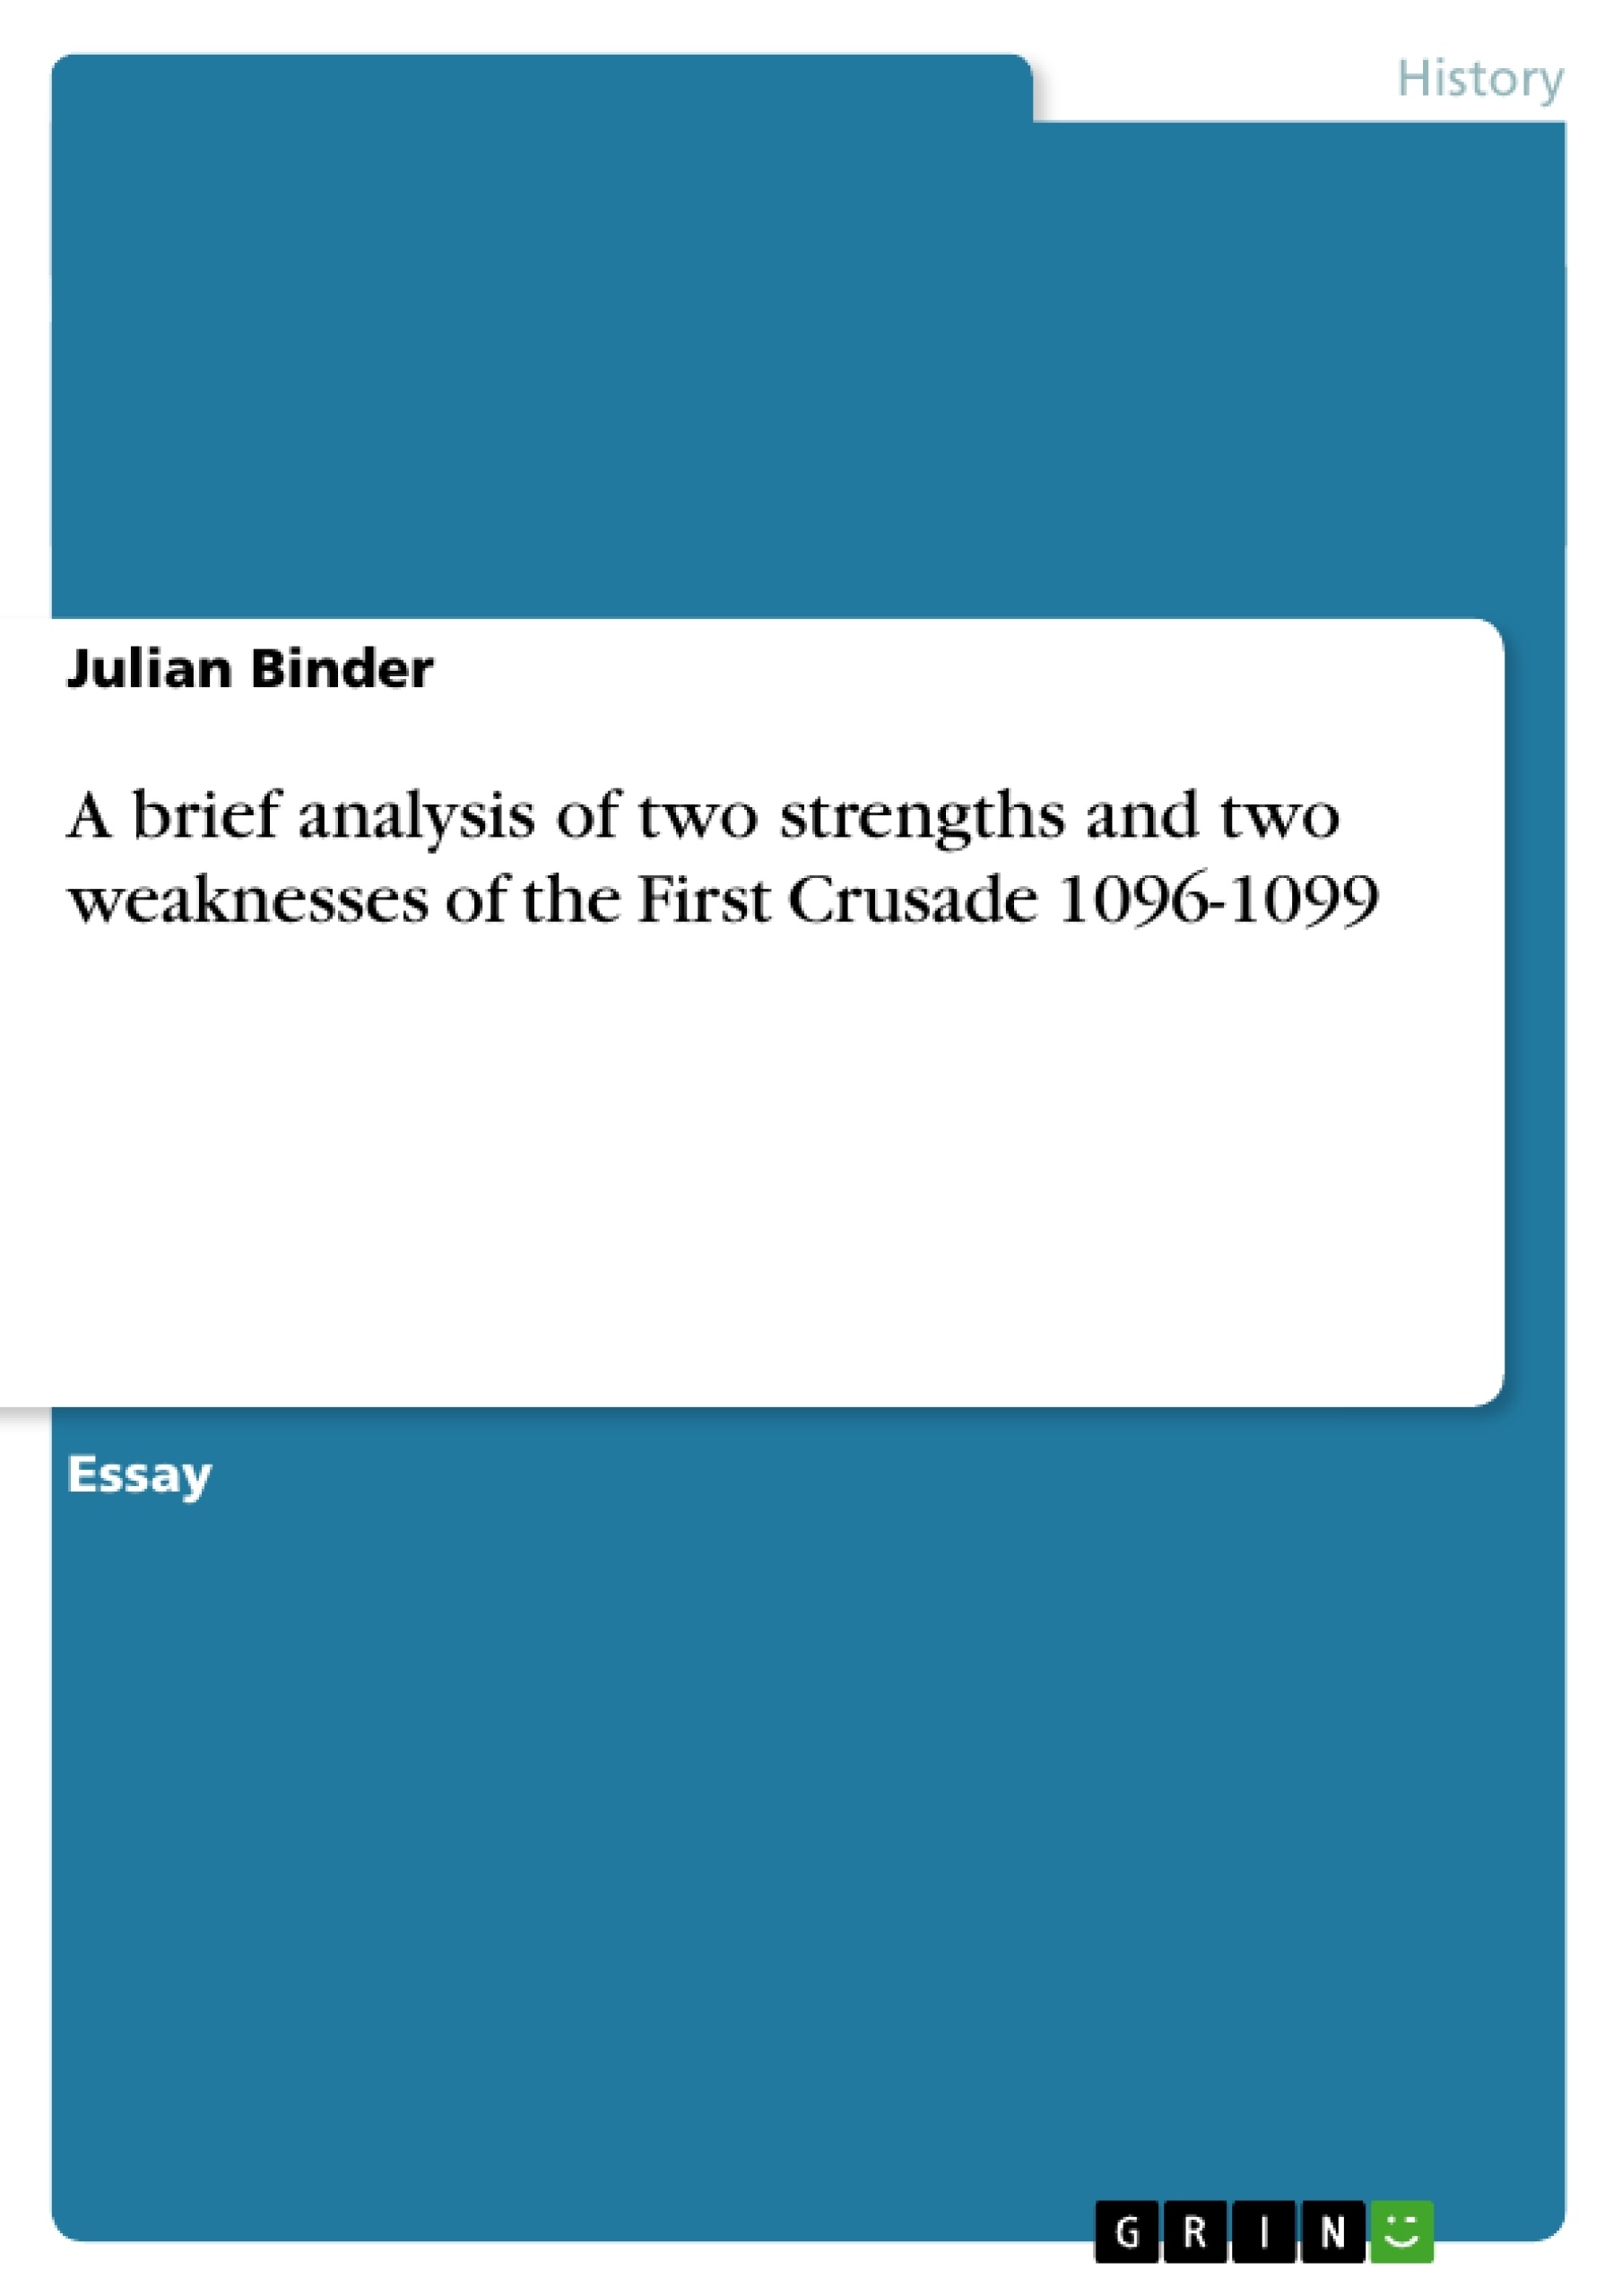 Title: A brief analysis of two strengths and two weaknesses of the First Crusade 1096-1099